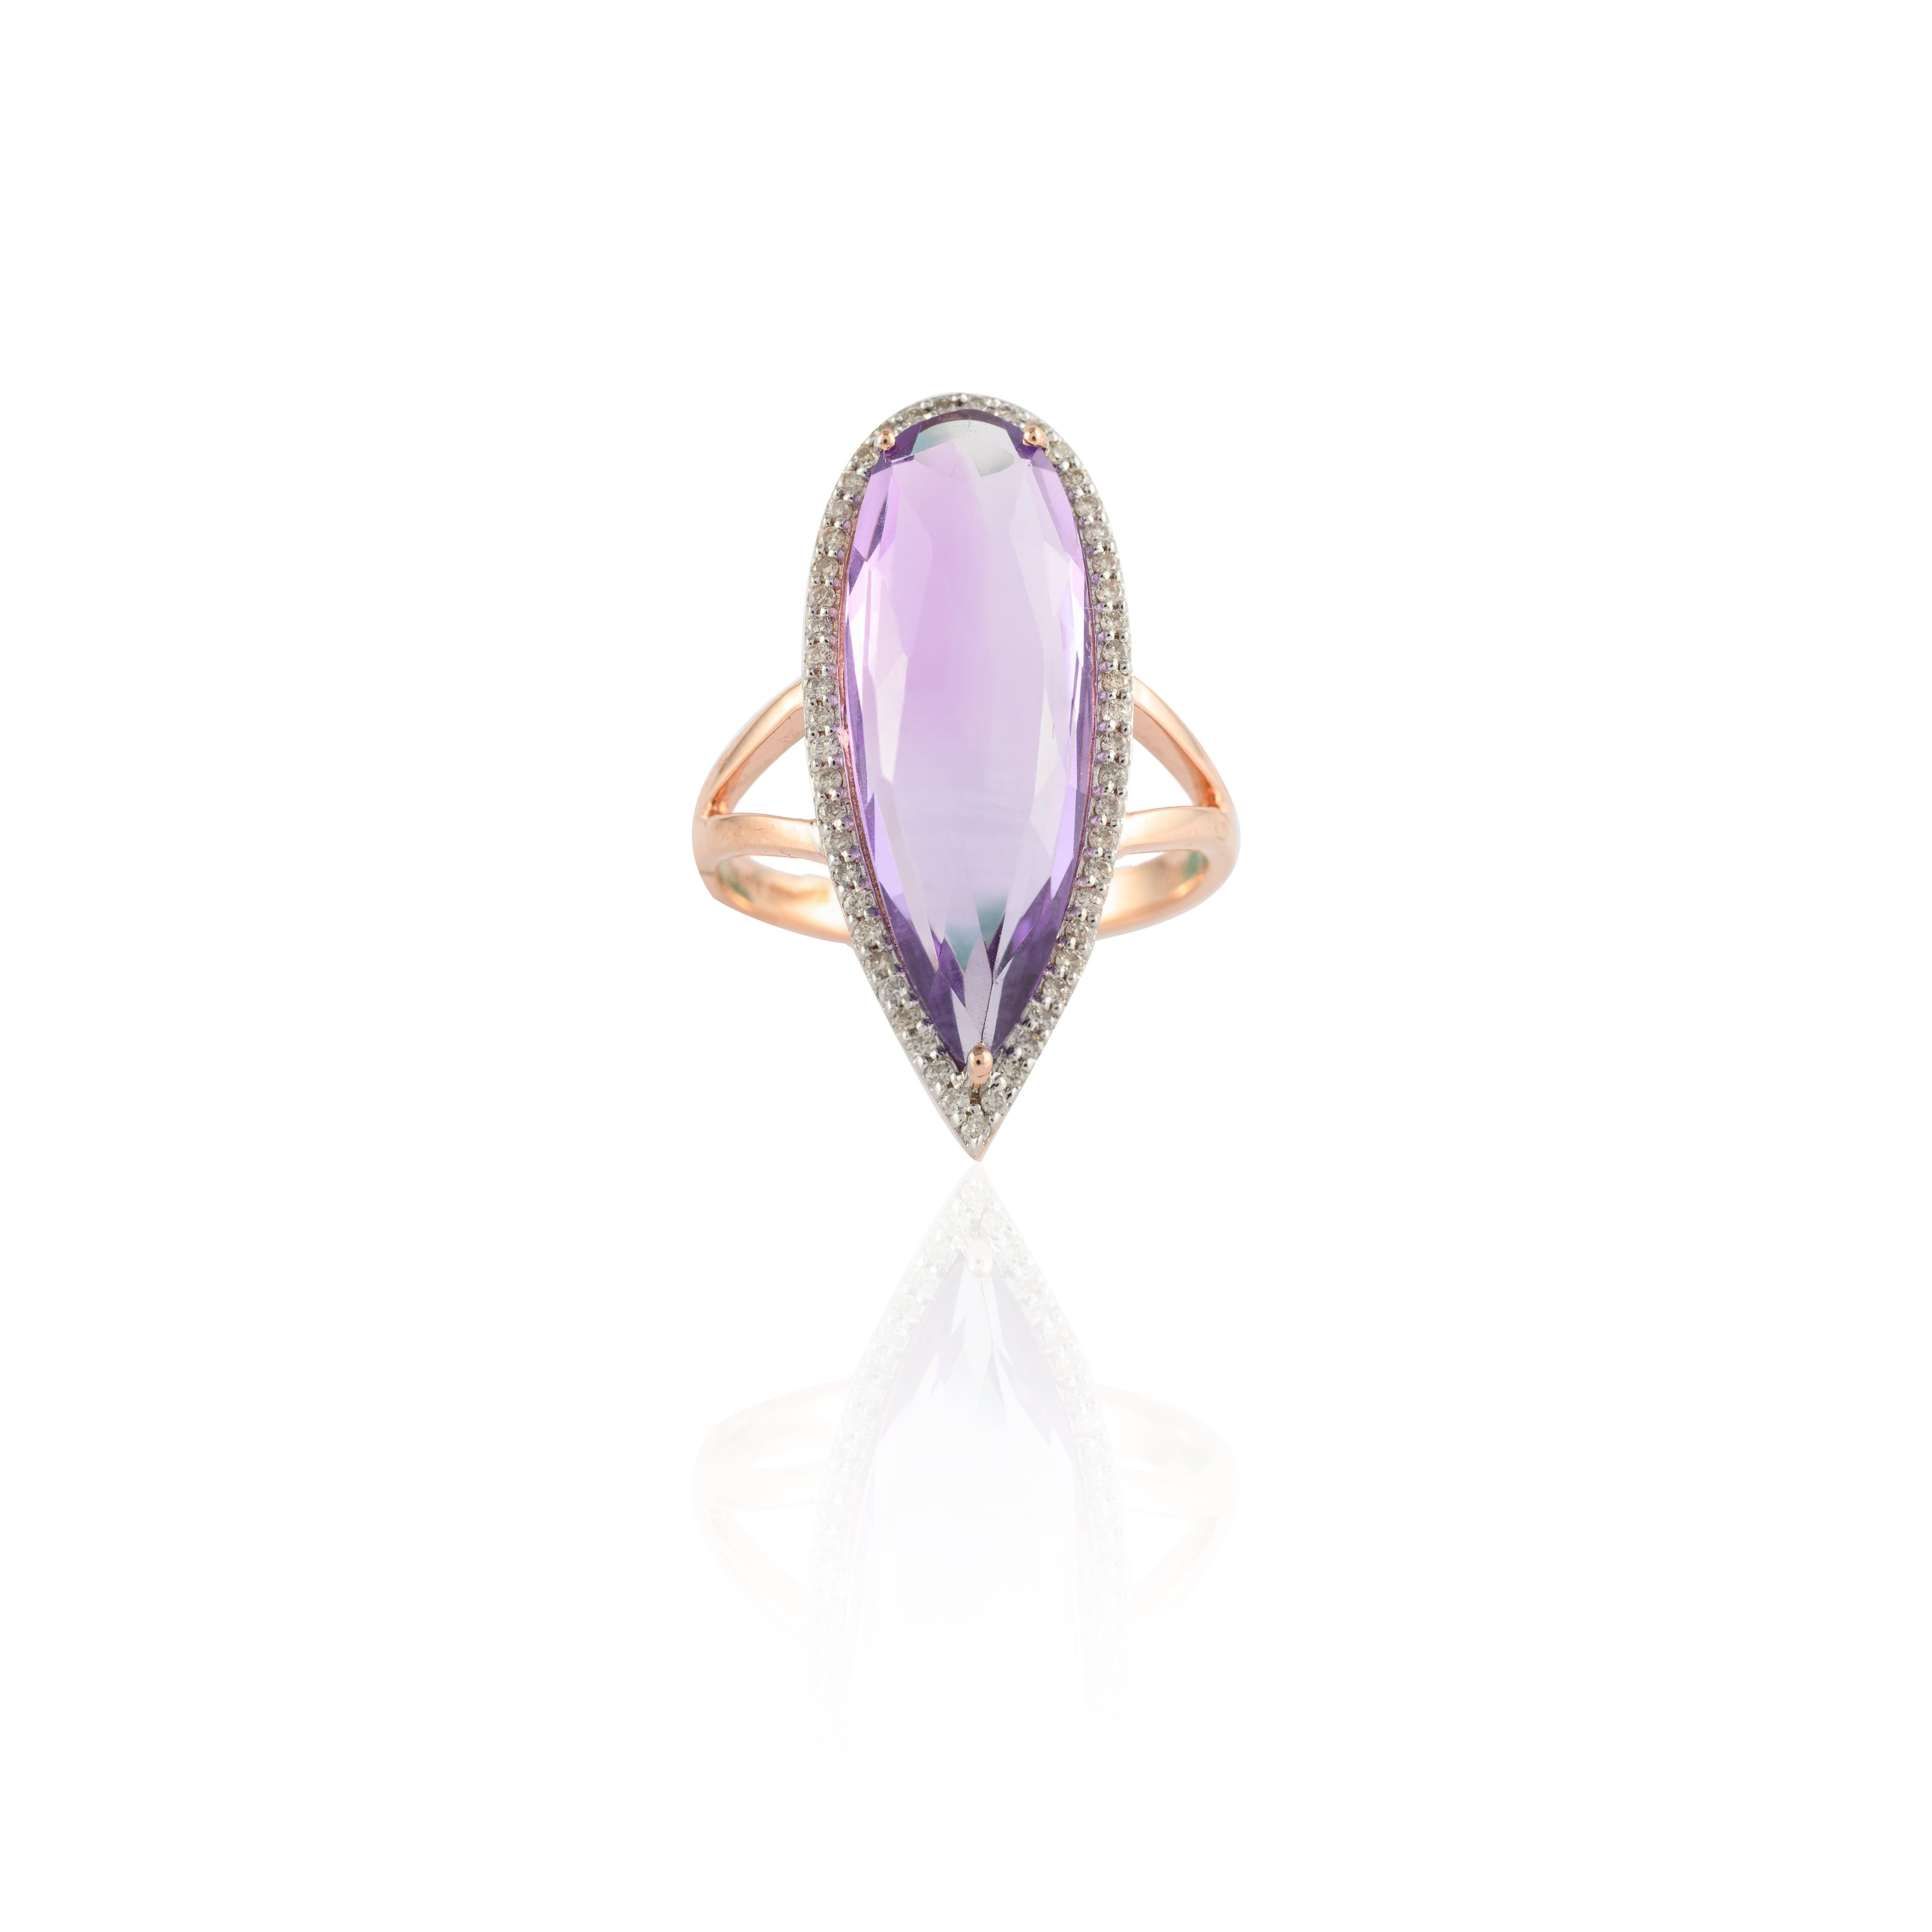 For Sale:  Crystal Clear Statement Amethyst Ring in 14k Rose Gold Settings & Halo Diamonds 3